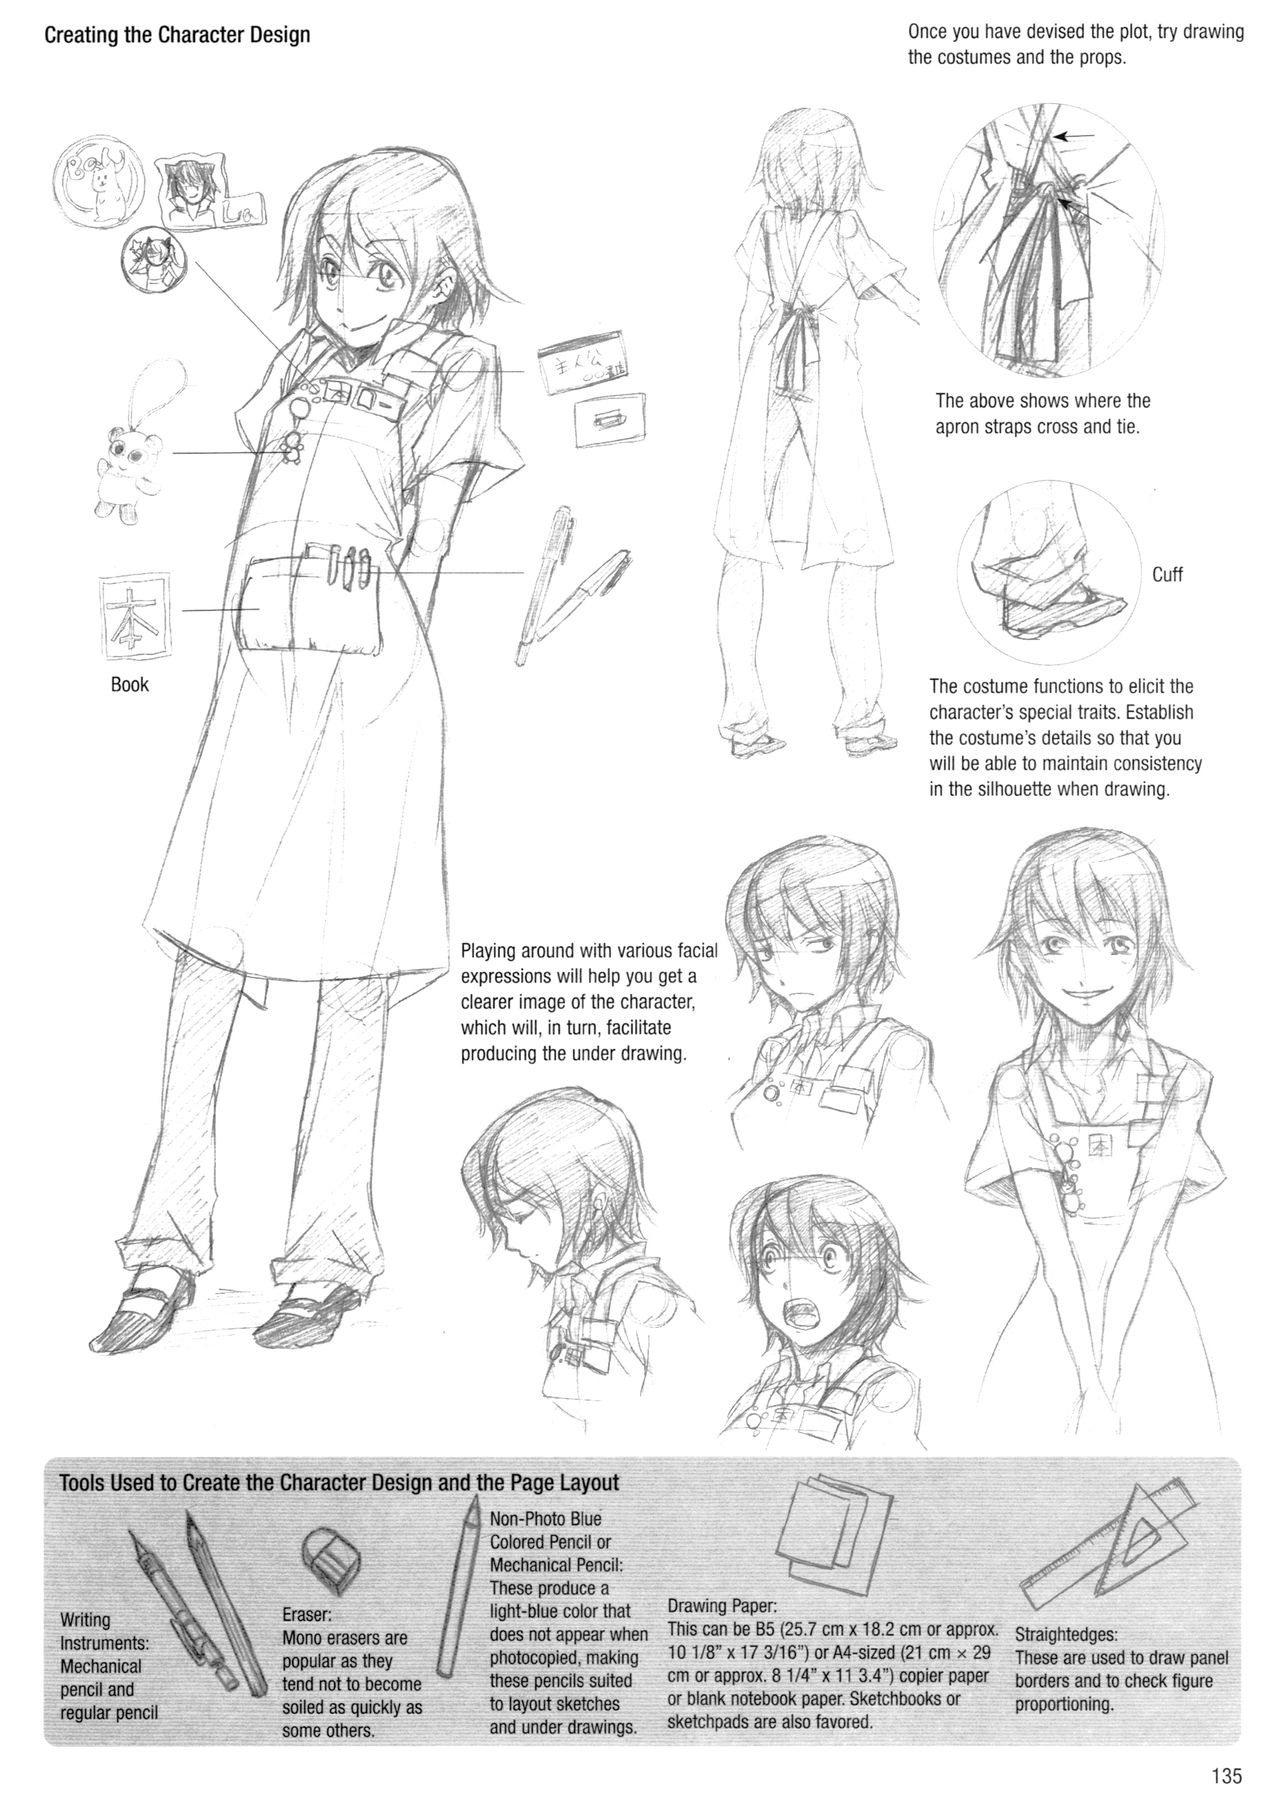 Sketching Manga-Style Vol. 3 - Unforgettable Characters 134